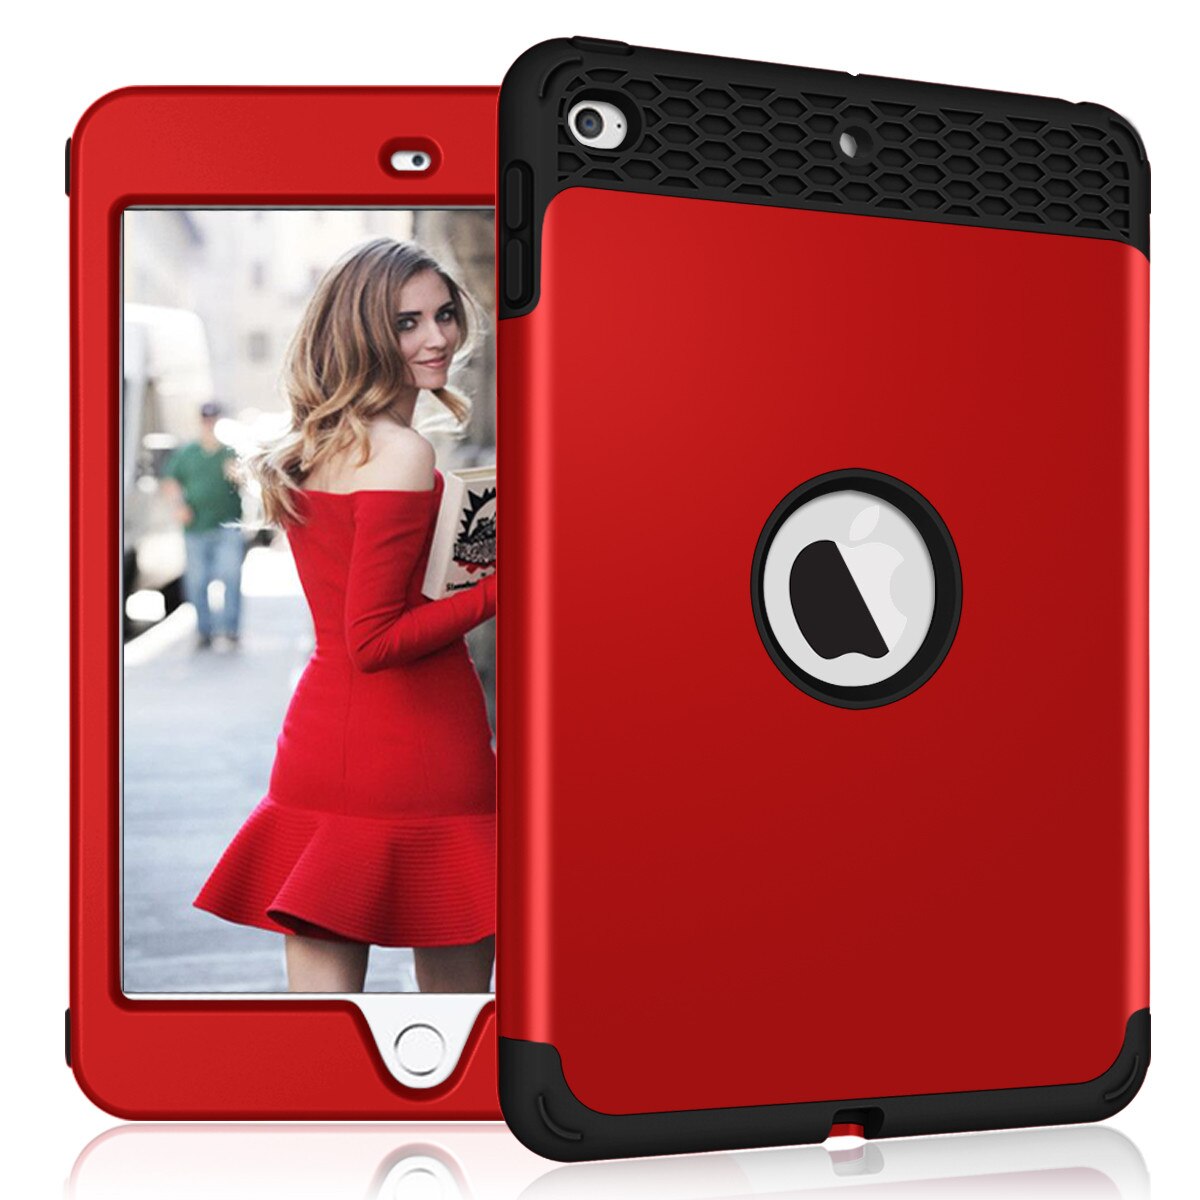 For Apple iPad Mini 4/5 Case, Heavy Duty Shockproof Hard Plastic Cover + Impact Resistant Silicone Rubber Protective Bumper Case - 200001091 Red Black / United States Find Epic Store